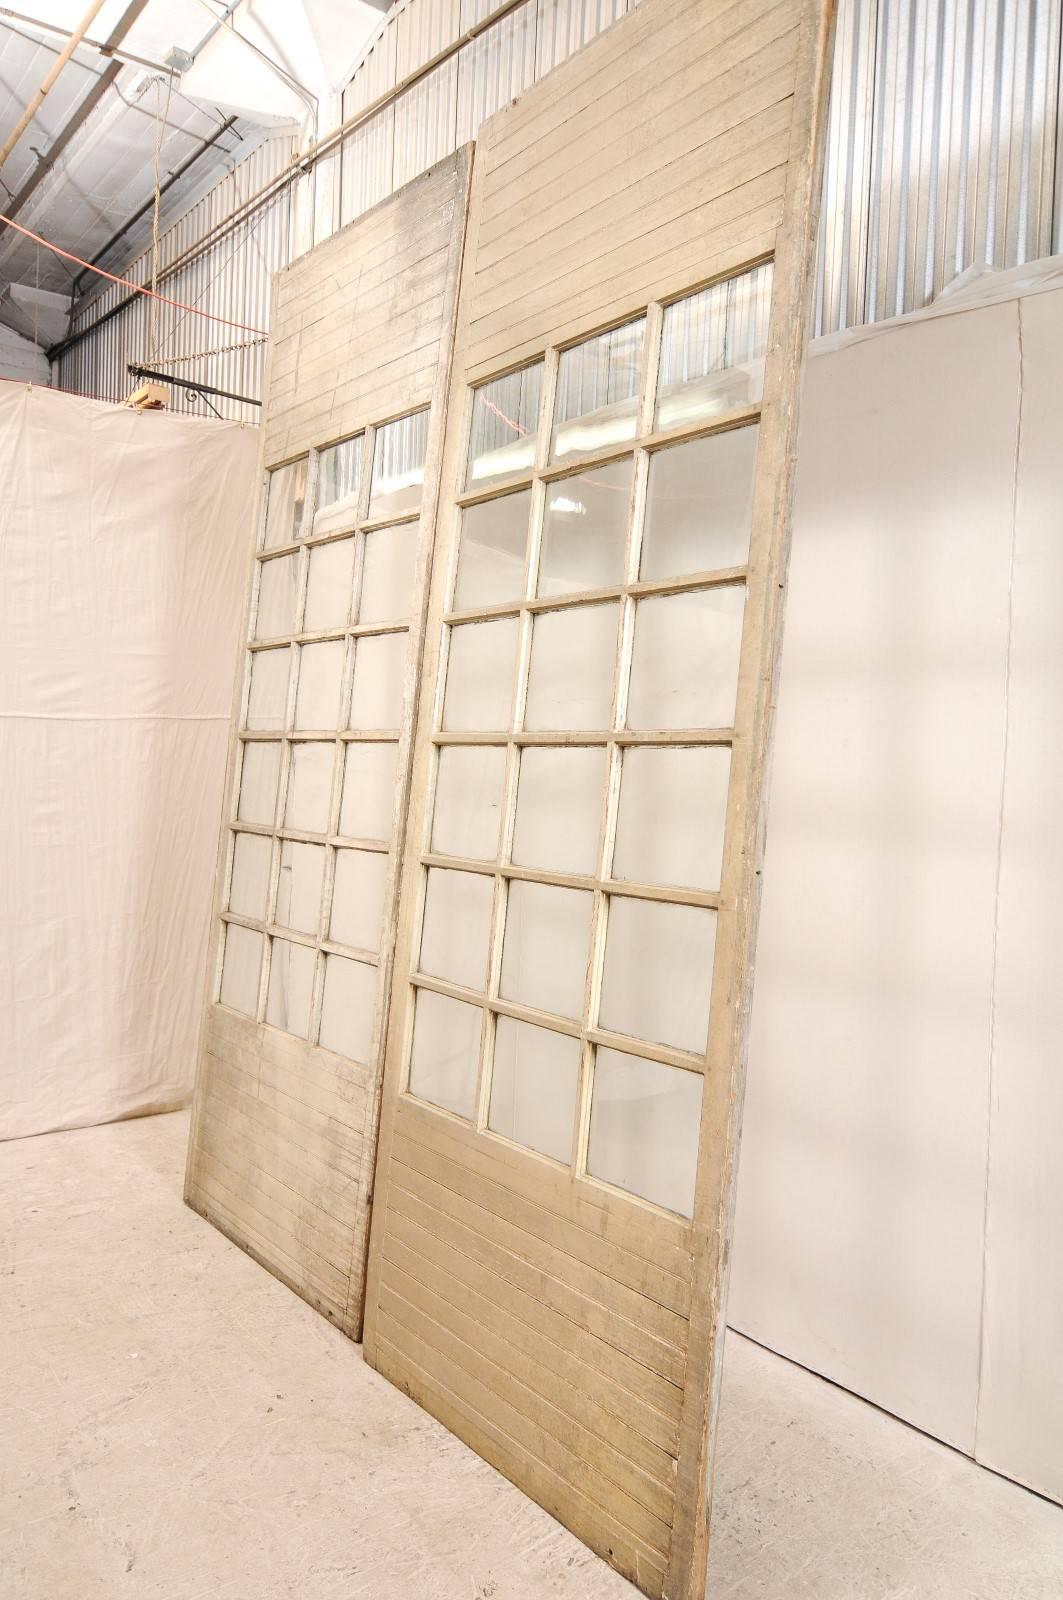 20th Century 10 ft+ Tall French Pair of Glass Paneled Wood Doors from the Early 20th C. For Sale